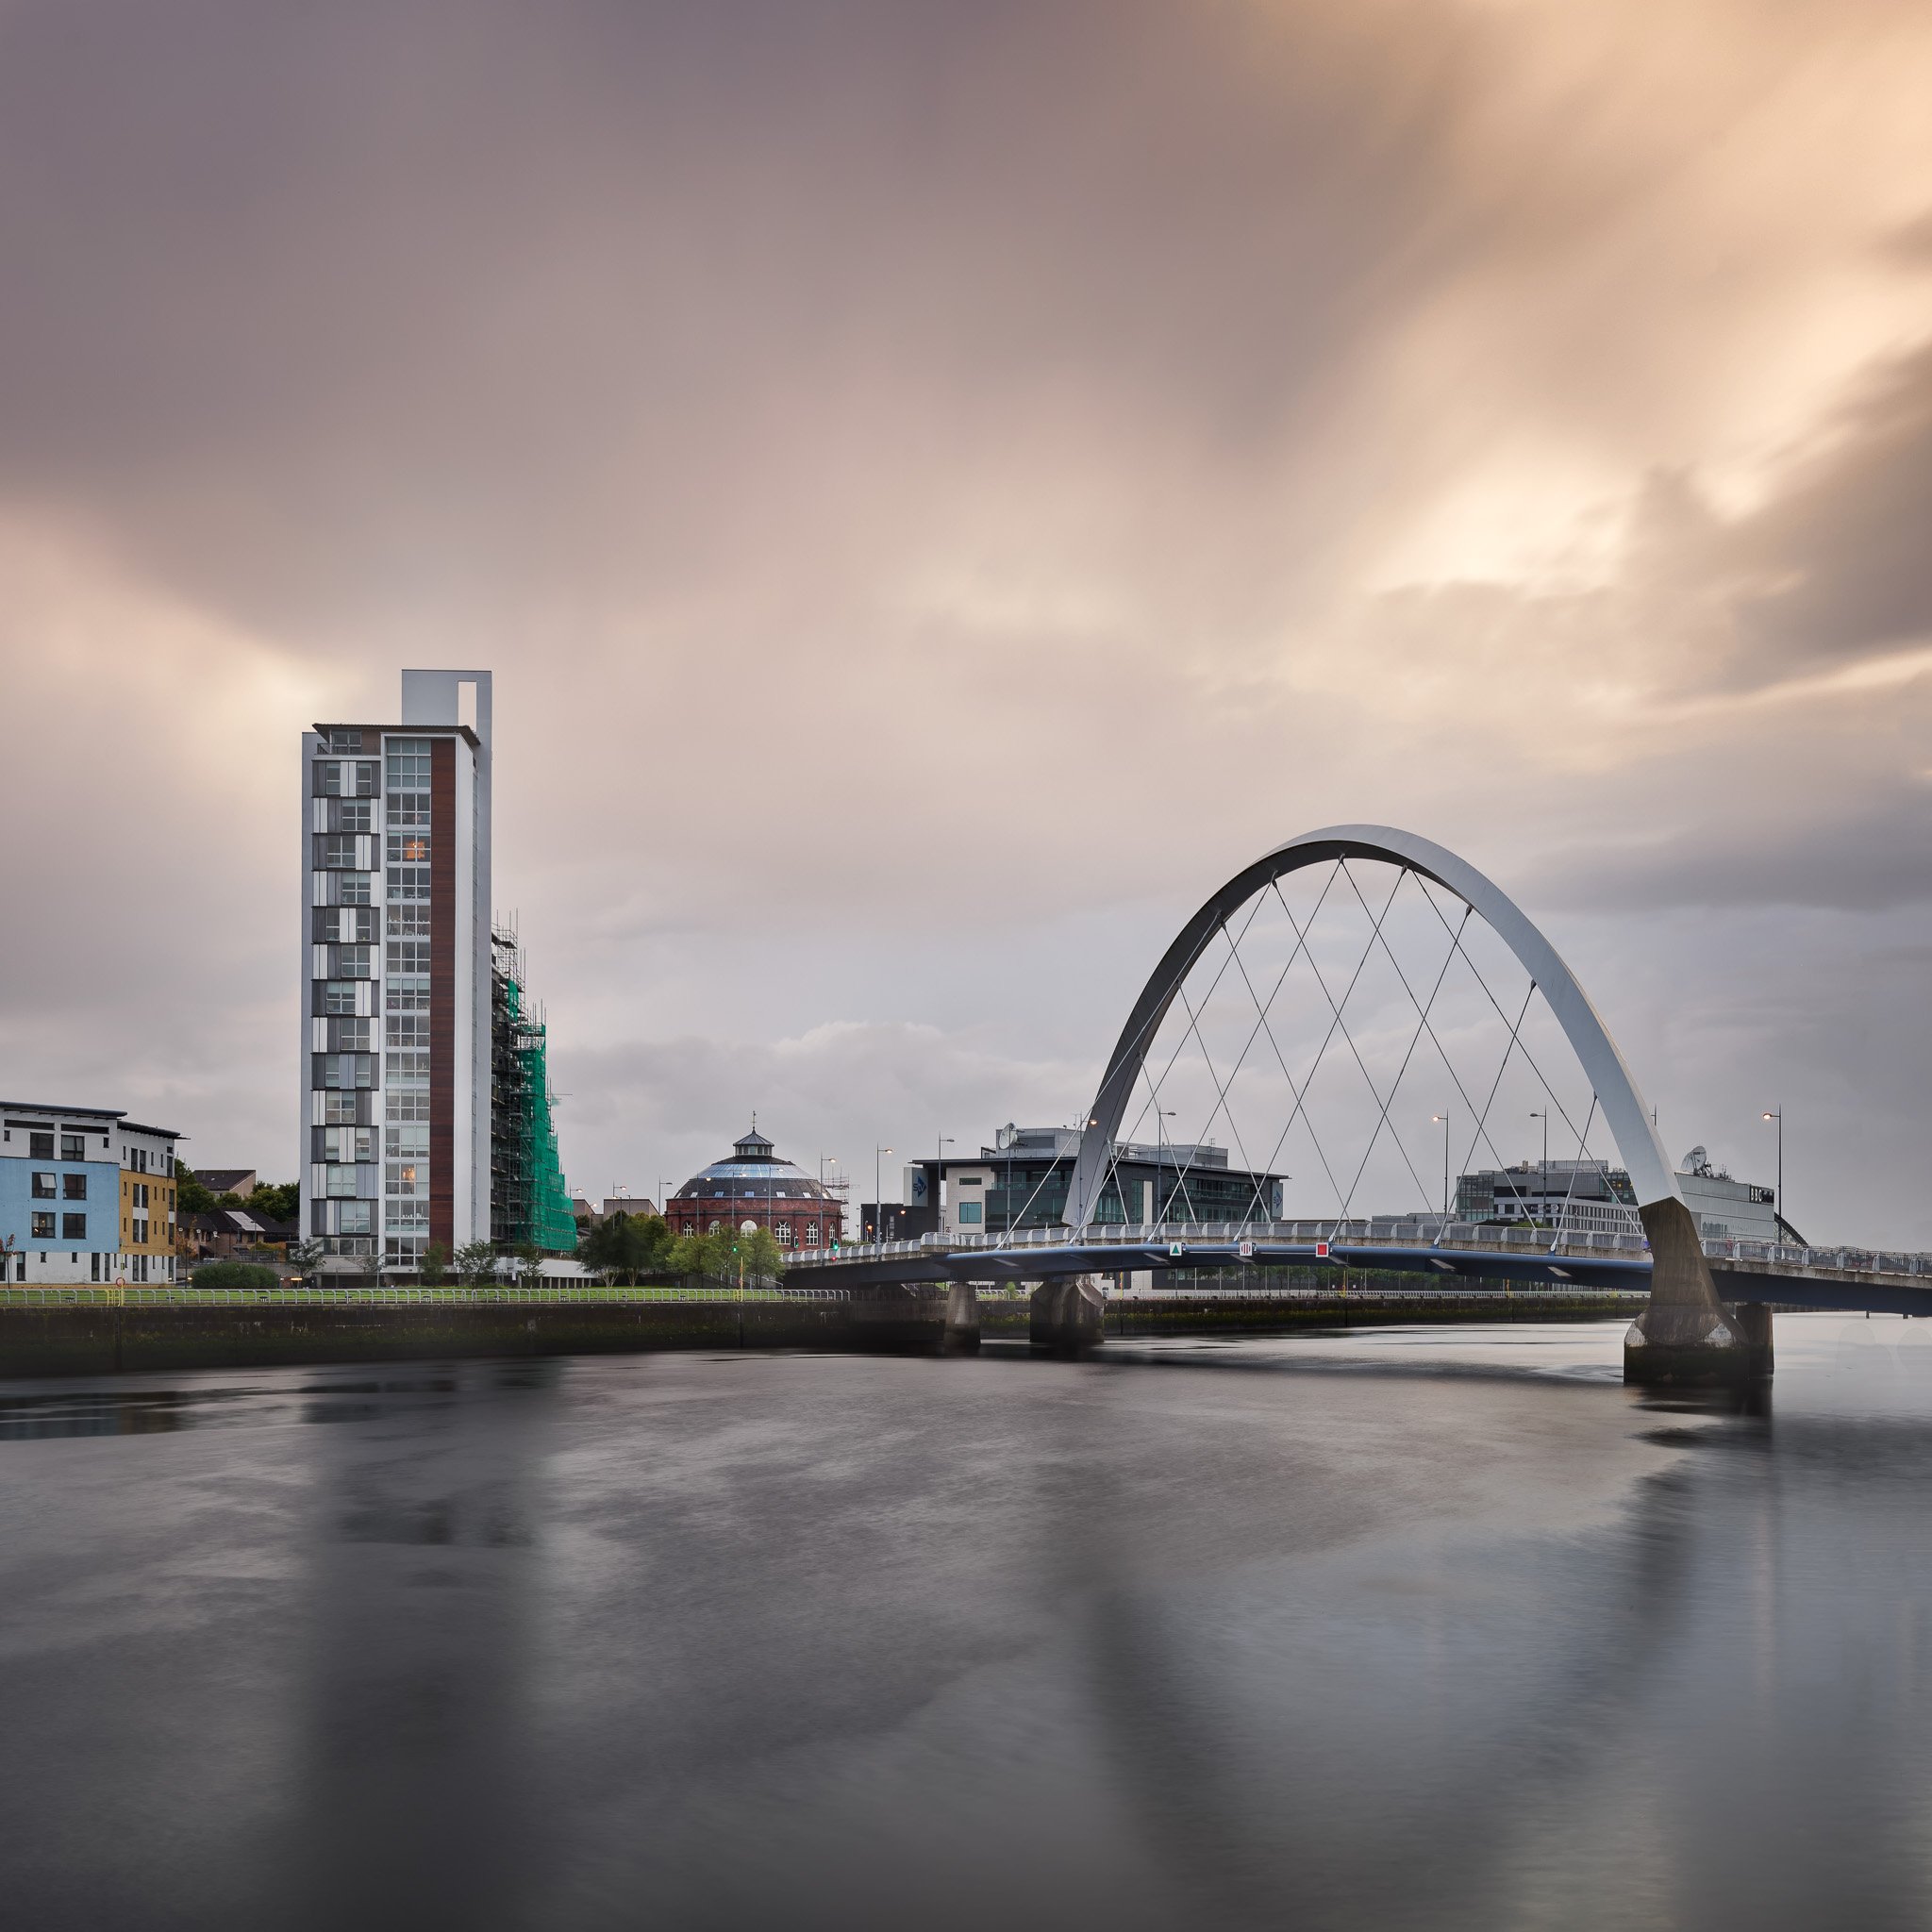 arc, arch, architectural, architecture, blue, bridge, britain, building, city, cityscape, clyde, construction, contemporary, curve, dusk, engineering, europe, european, evening, facade, glasgow, iconic, kingdom, landmark, metal, modern, monument, overcast, Andrey Omelyanchuk